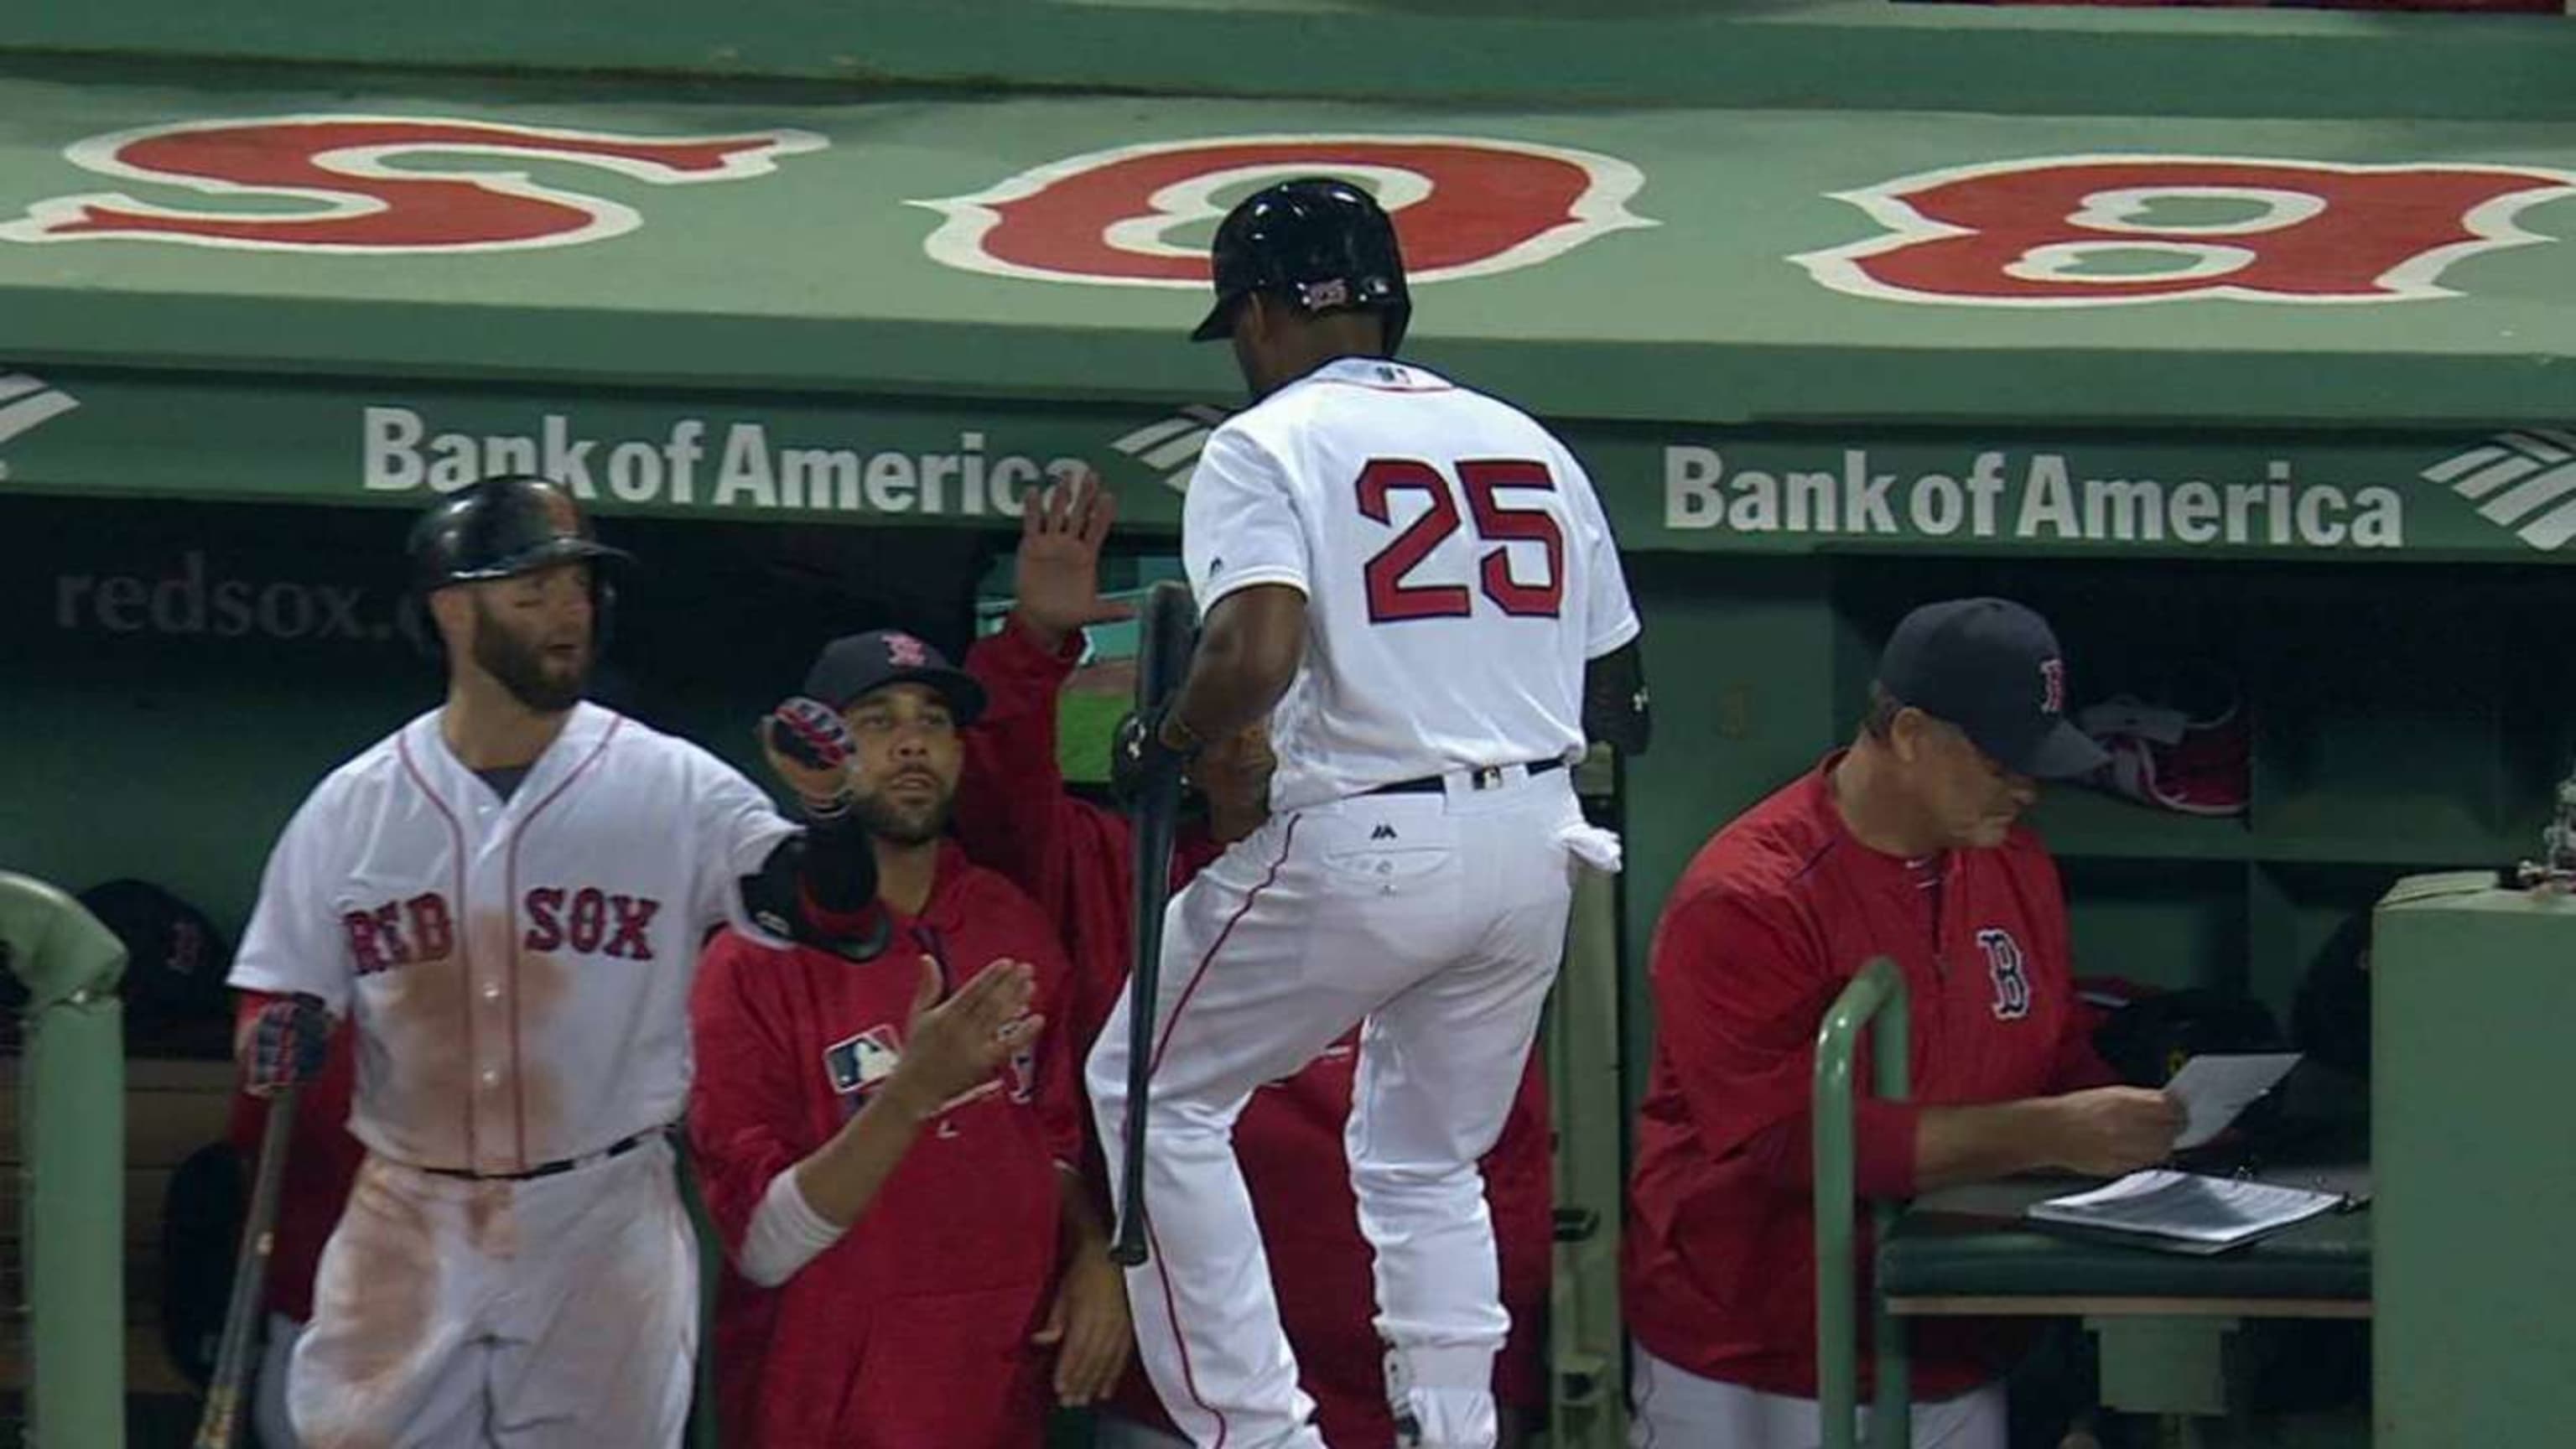 Jackie Bradley Jr. gets payback on Red Sox with 2 hits in Fenway